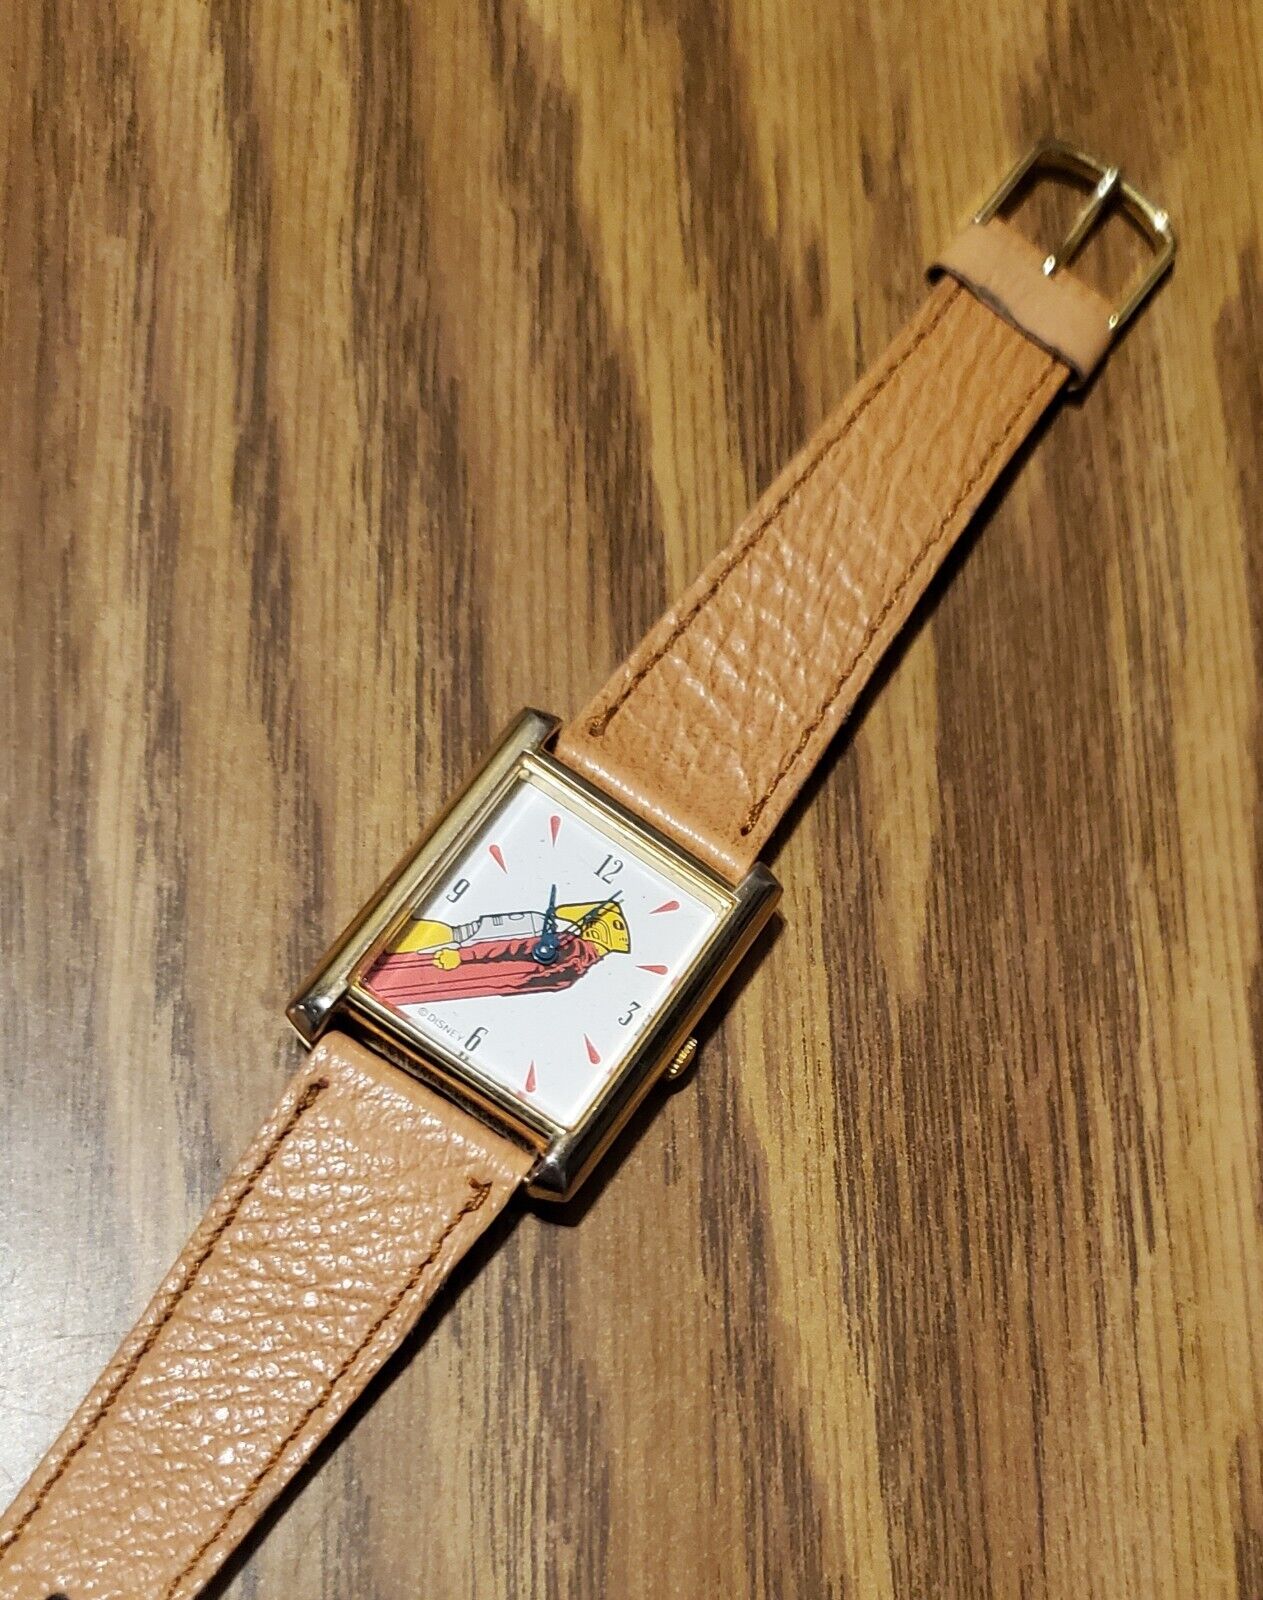 Vntg Disney Rocketeer Watch Limited Edition Tan Band with Gold Crown